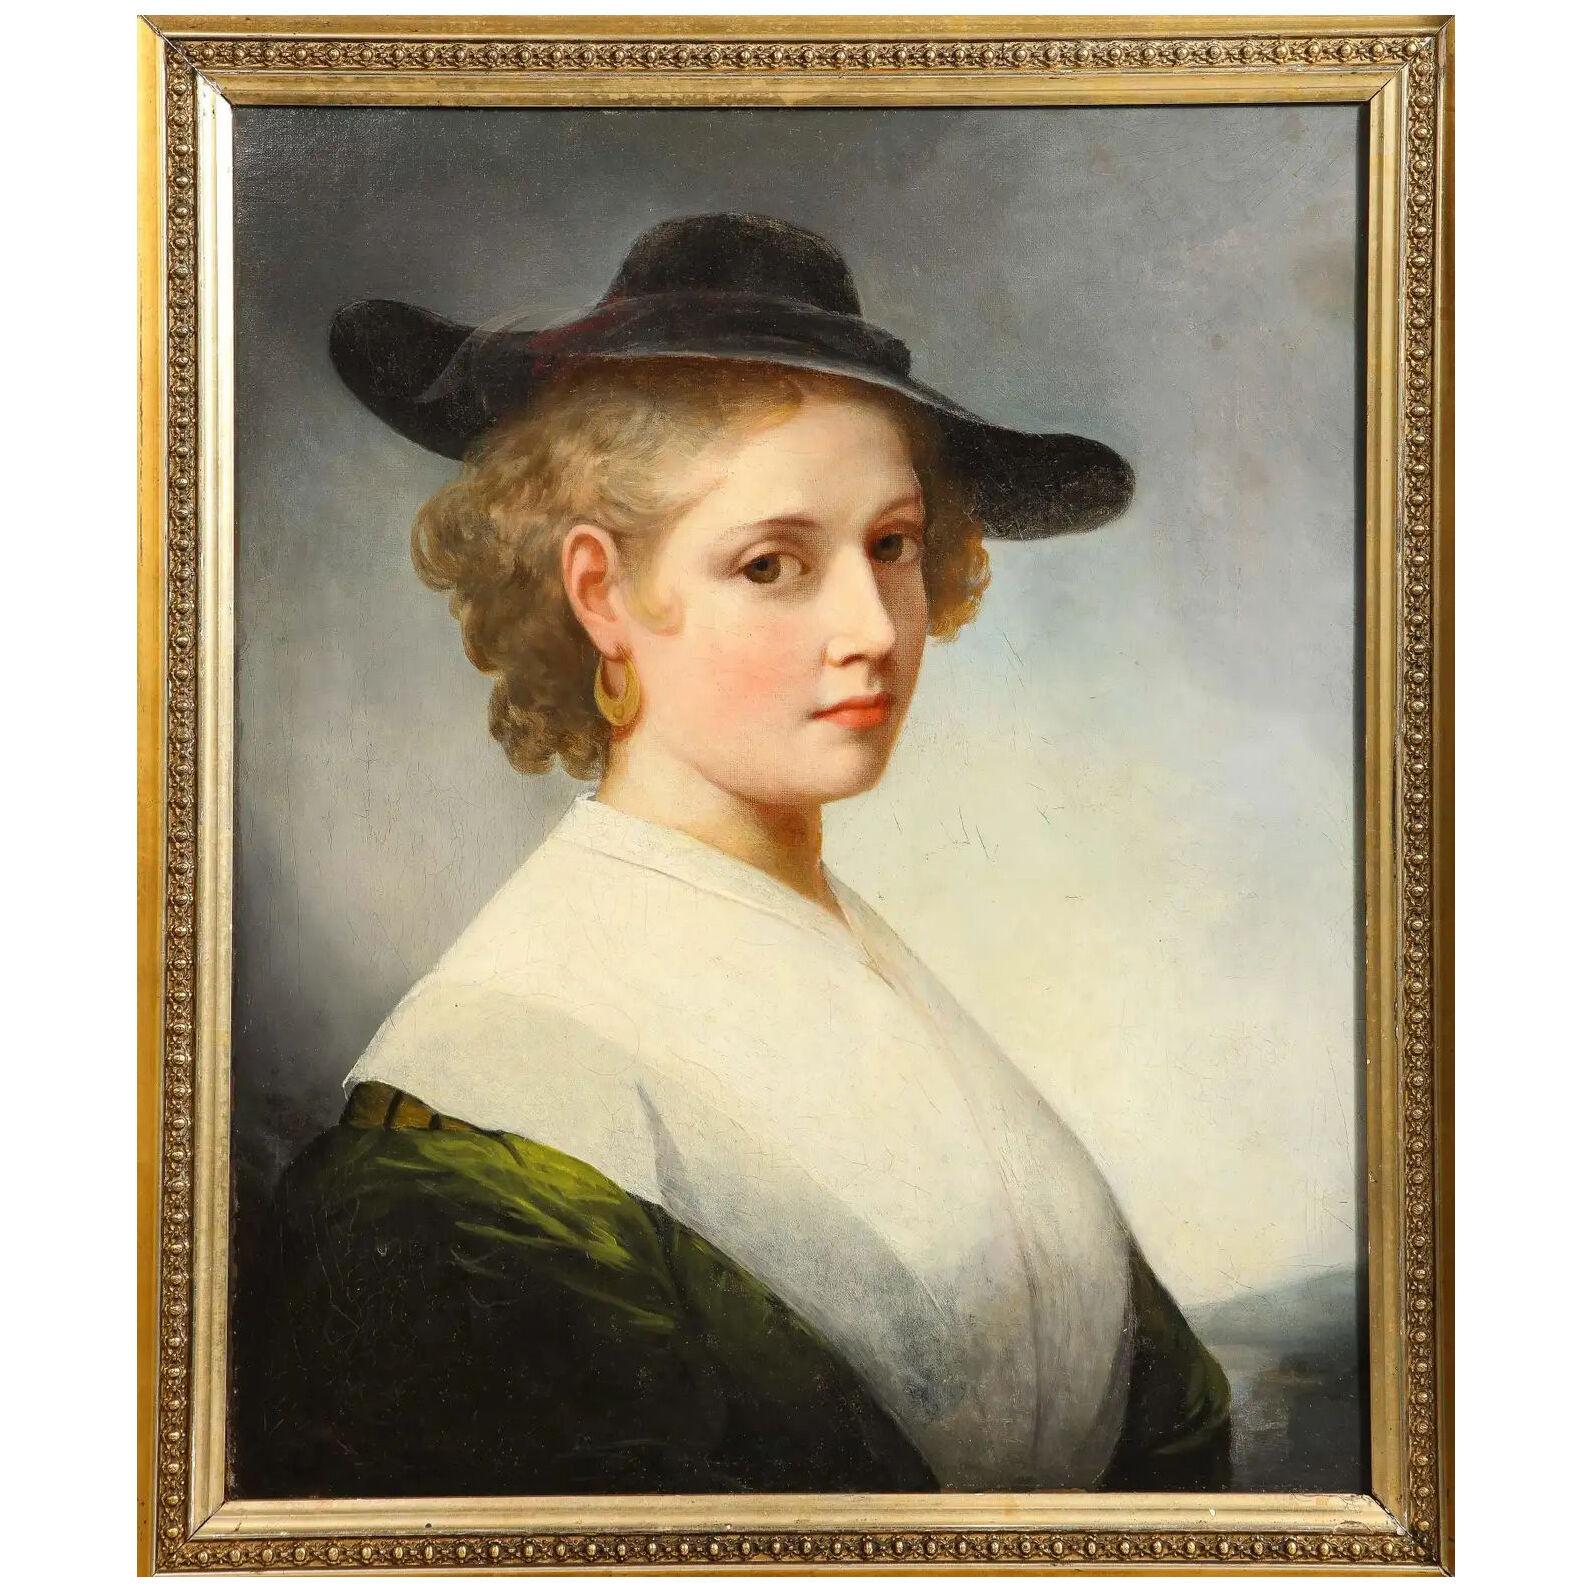 (British School, C. 1840) An Exceptional Quality Portrait “Lady in Green”